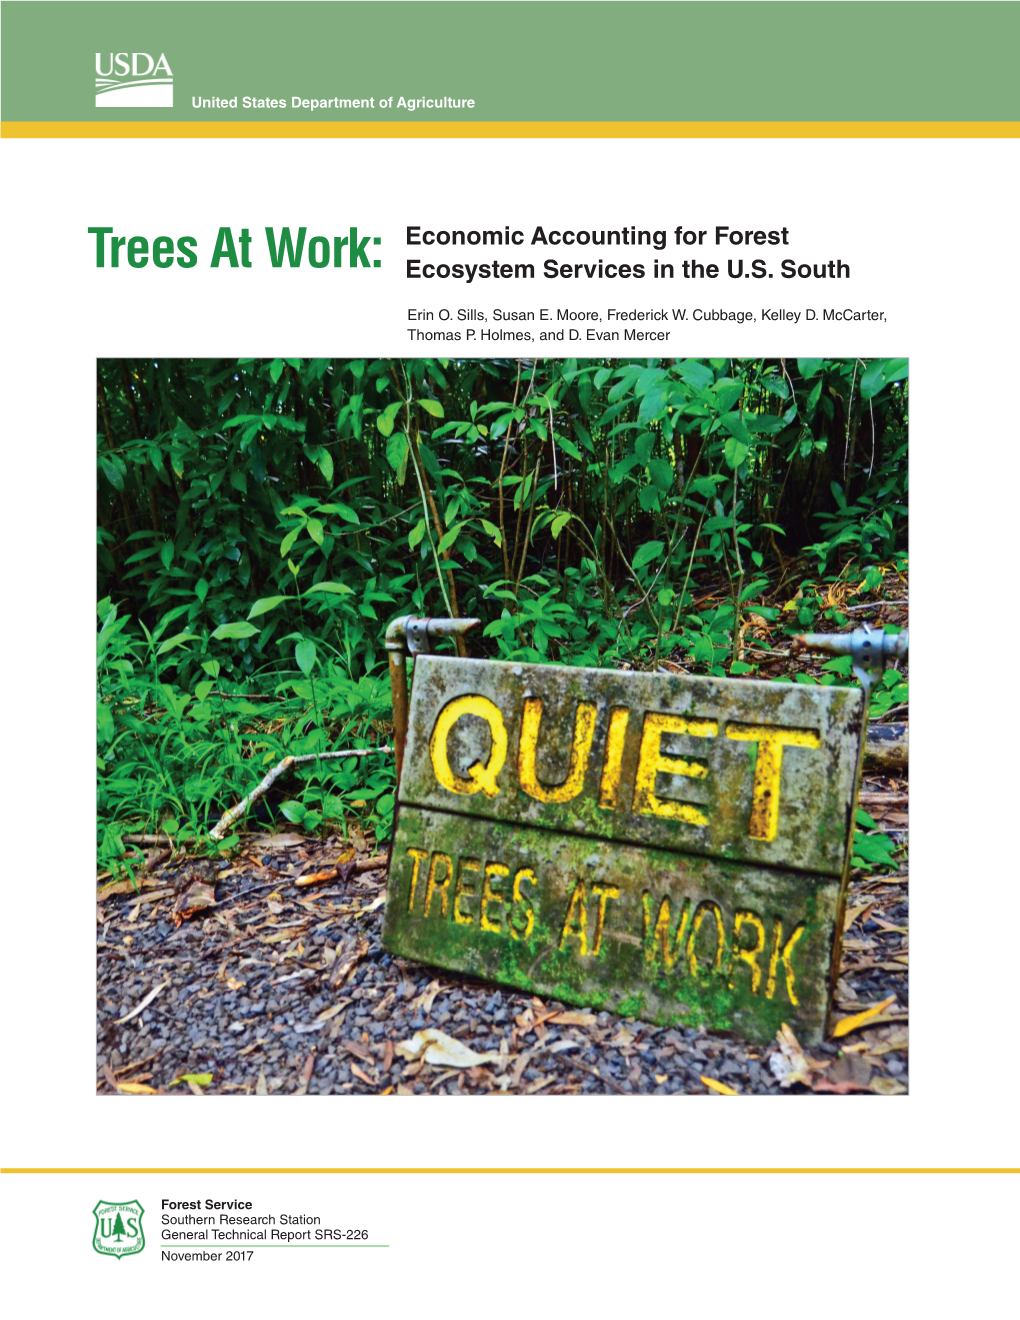 Trees at Work: Ecosystem Services in the U.S